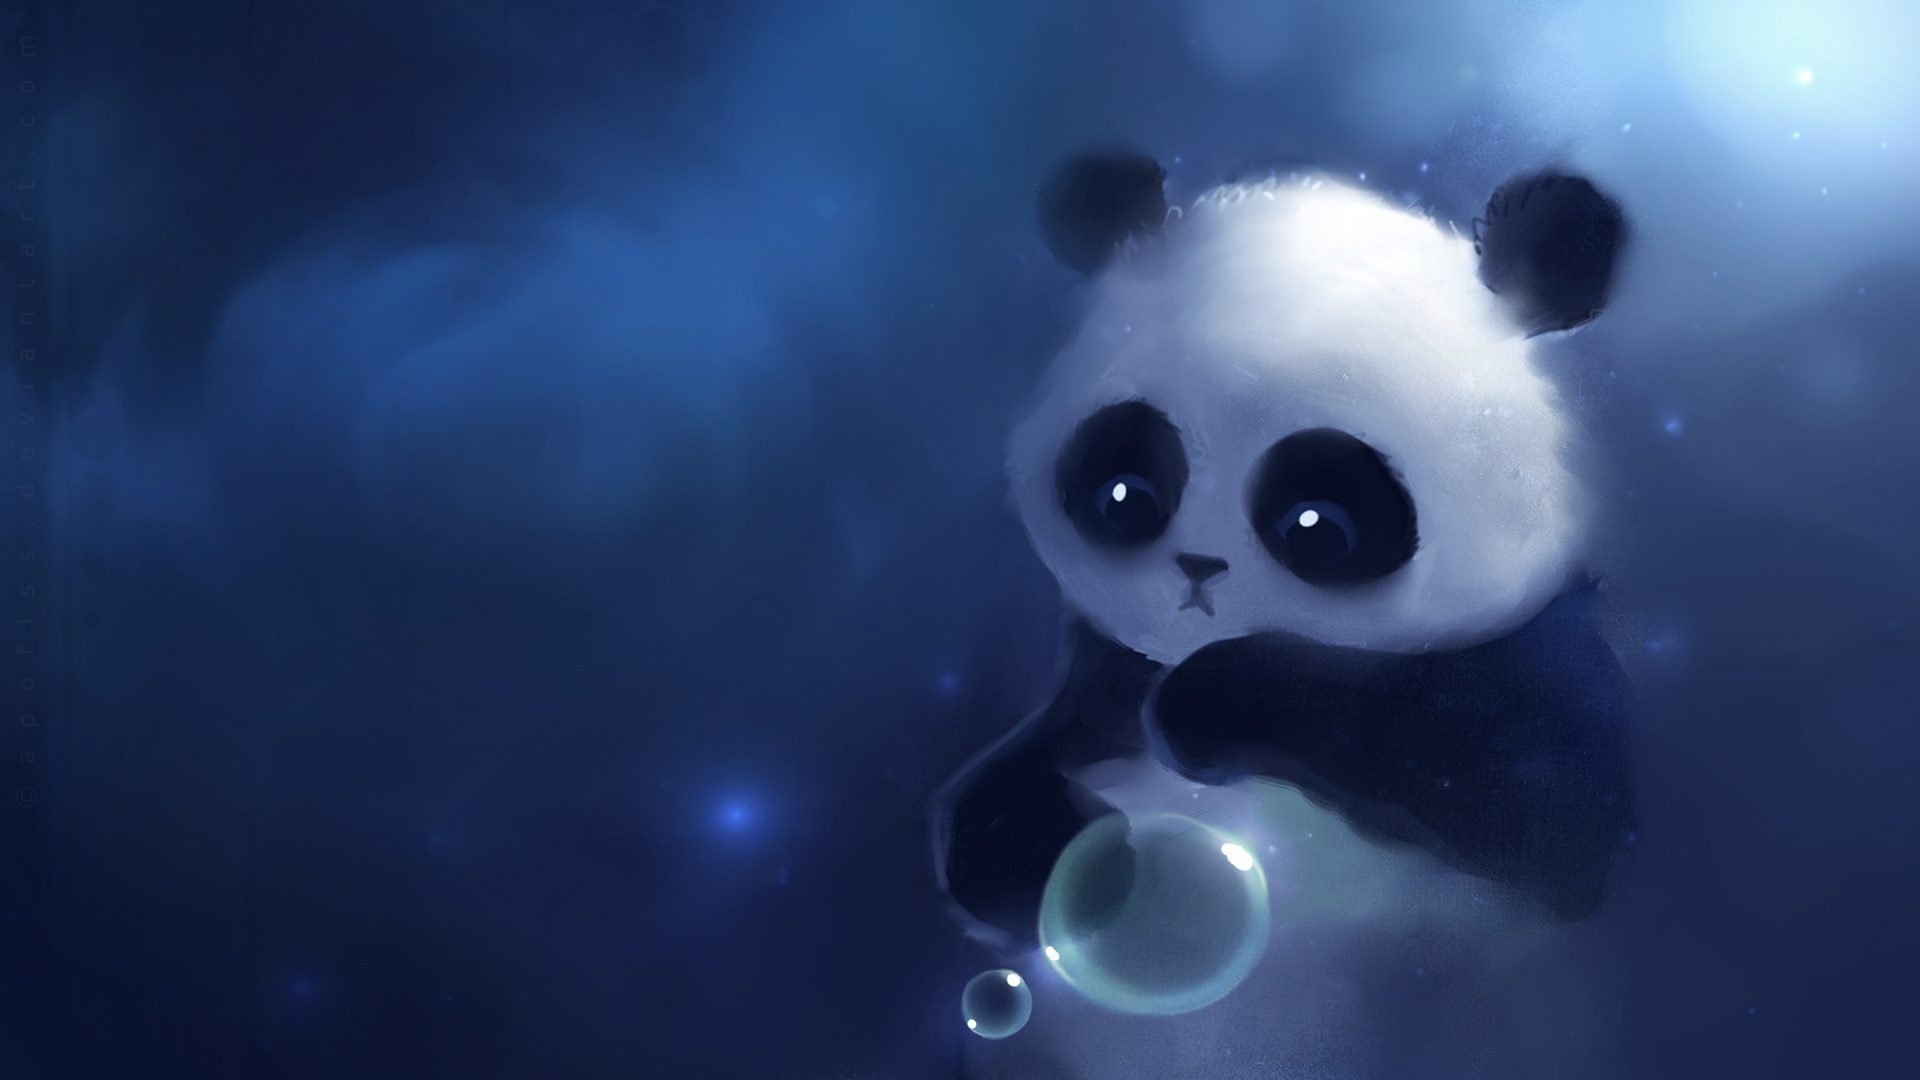 Mobile wallpaper: Pandas, Pictures, 32671 download the picture for free.